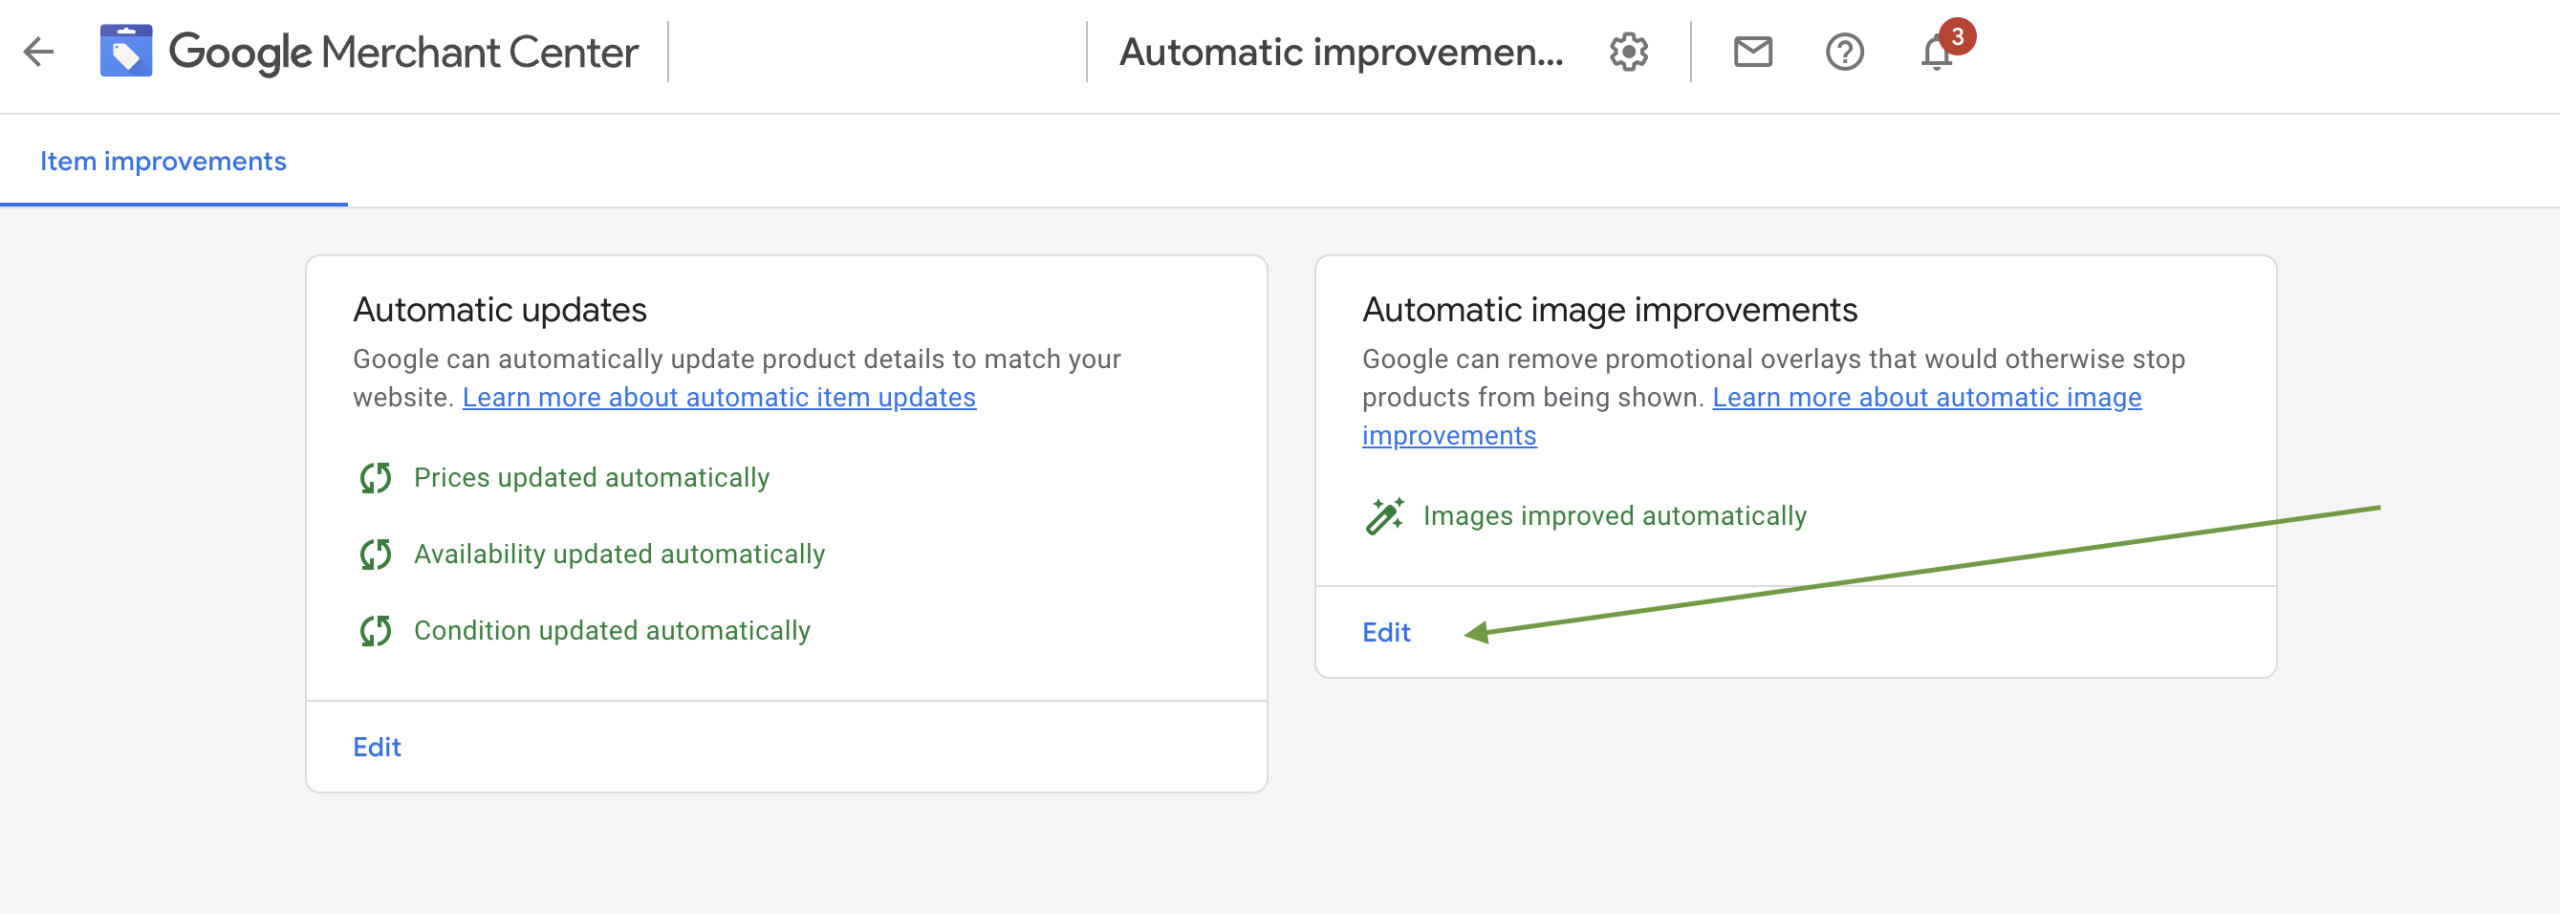 Screenshot of where to access Automatic image improvements in Merchant Center interface